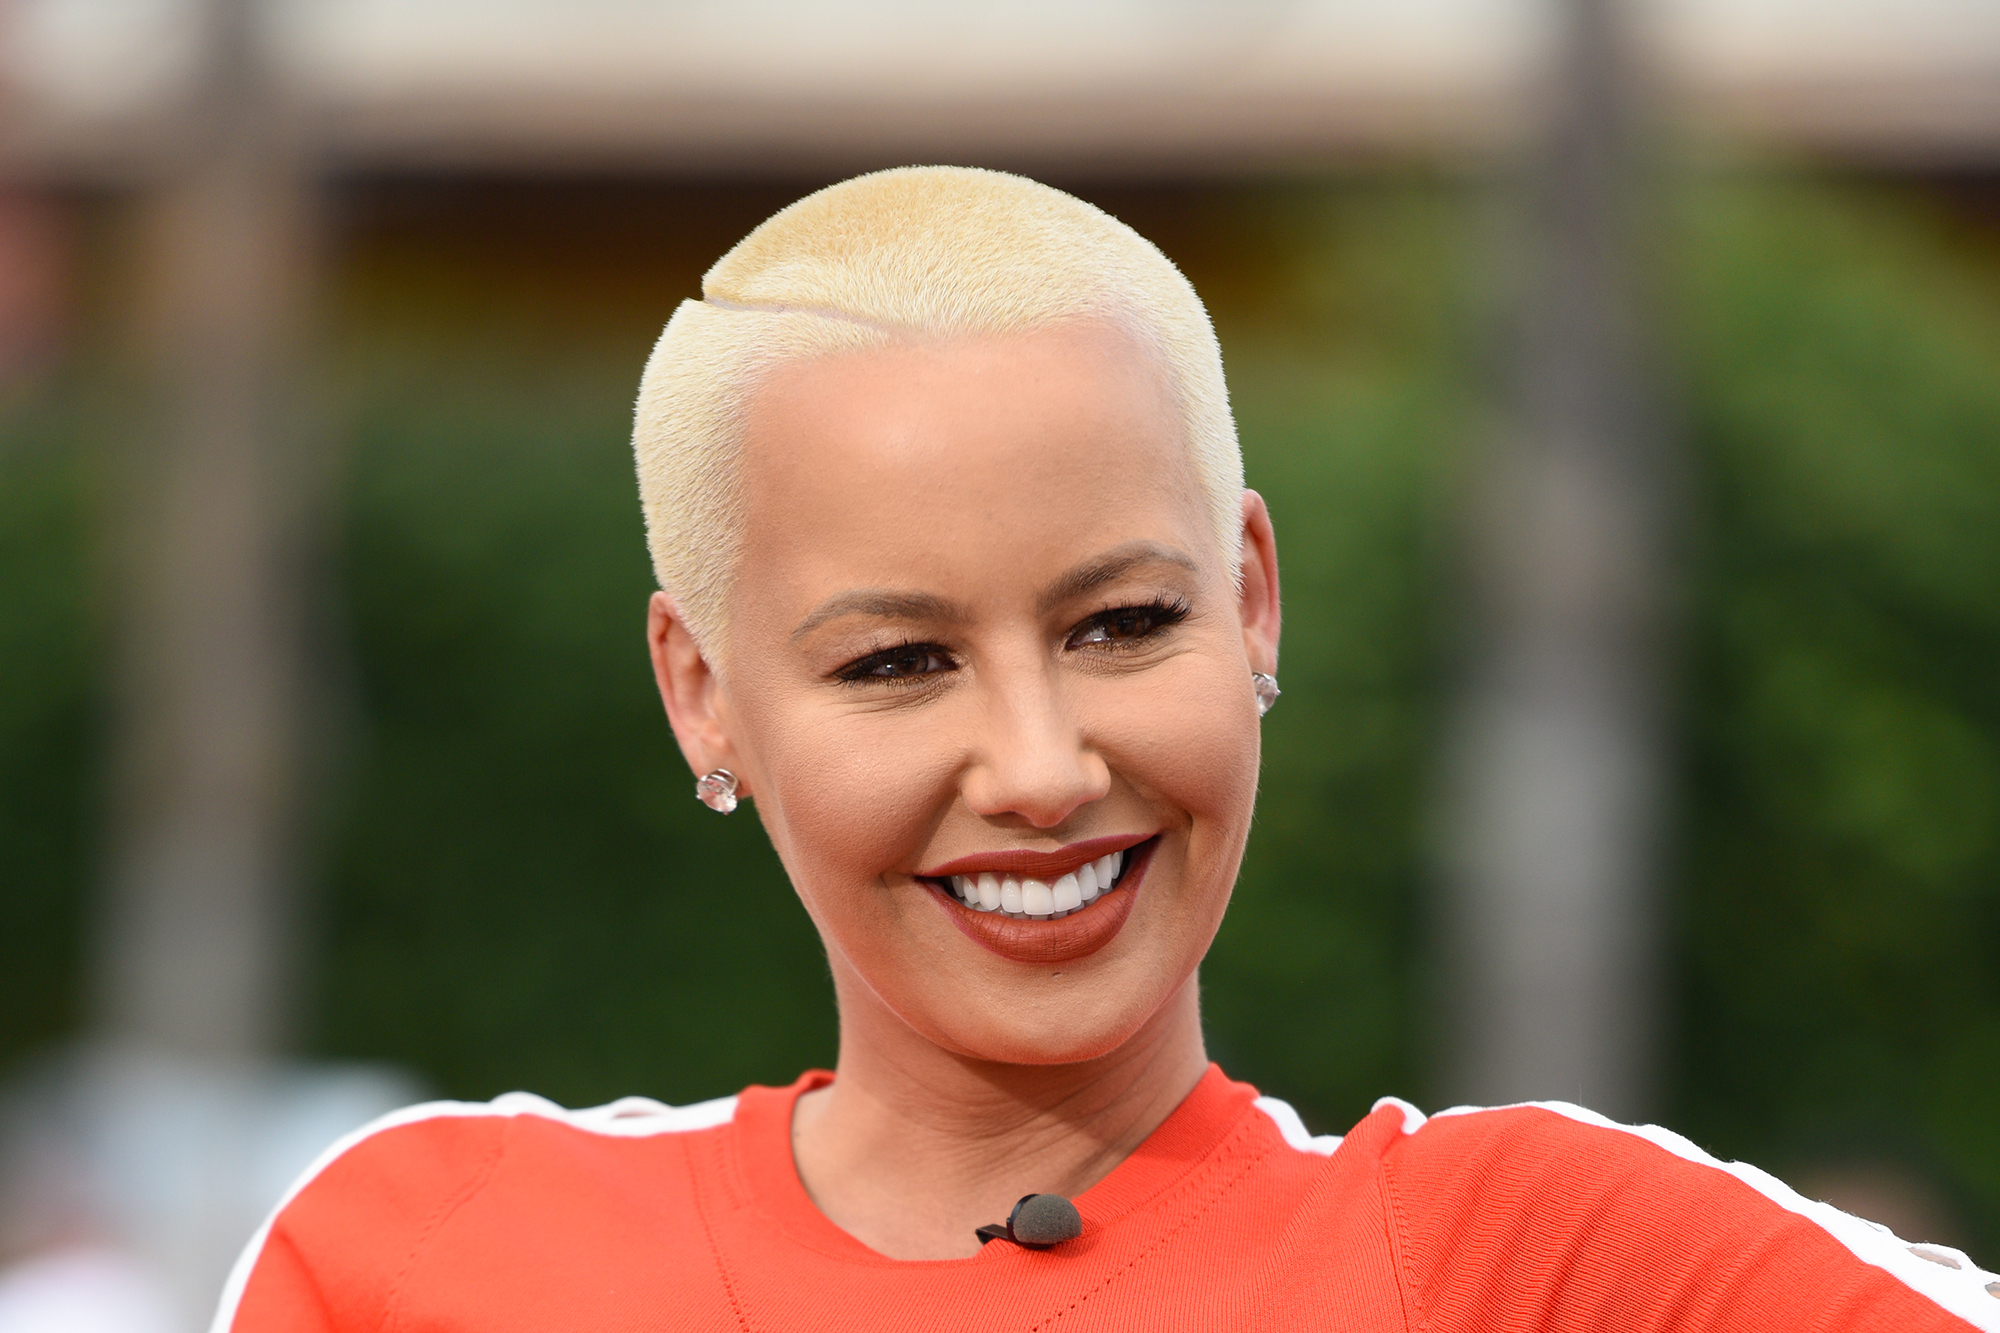 Amber Rose visits "Extra" at Universal Studios Hollywood on June 13, 2016 in Universal City, California.  (Photo by Noel Vasquez/Getty Images) (Noel Vasquez&mdash;Getty Images)